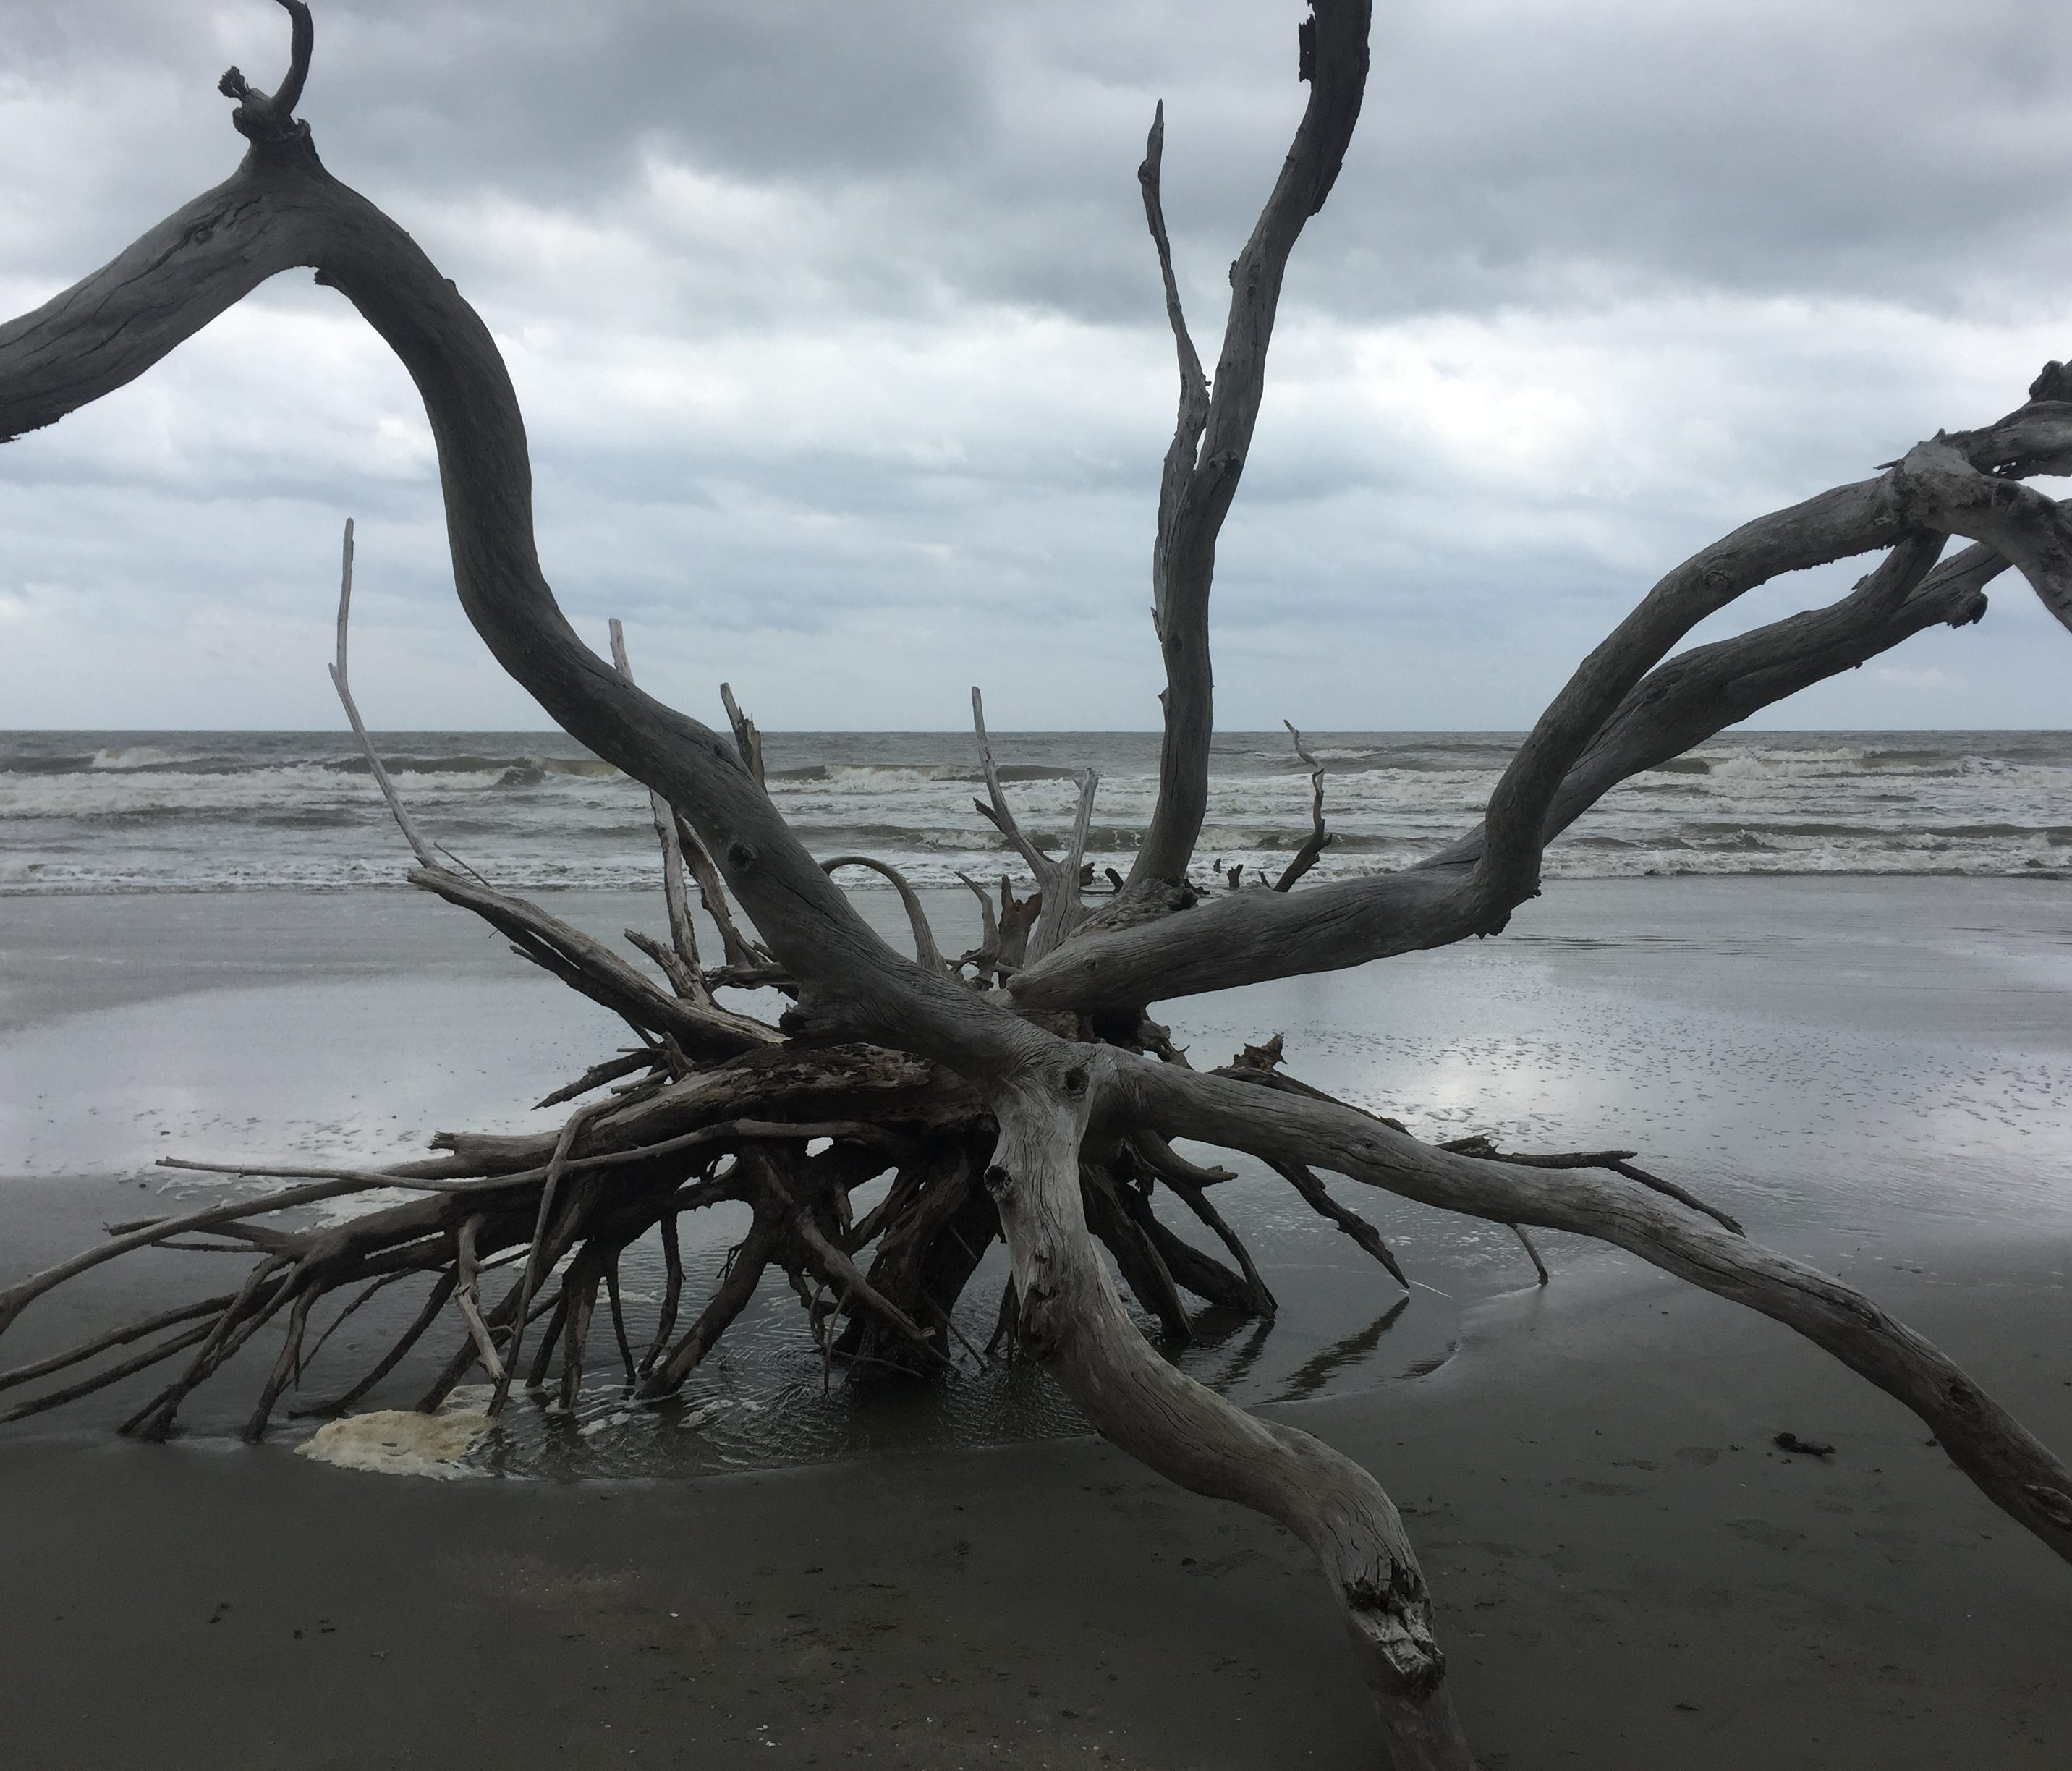 At Boneyard Beach, you quickly recognize the power of nature.